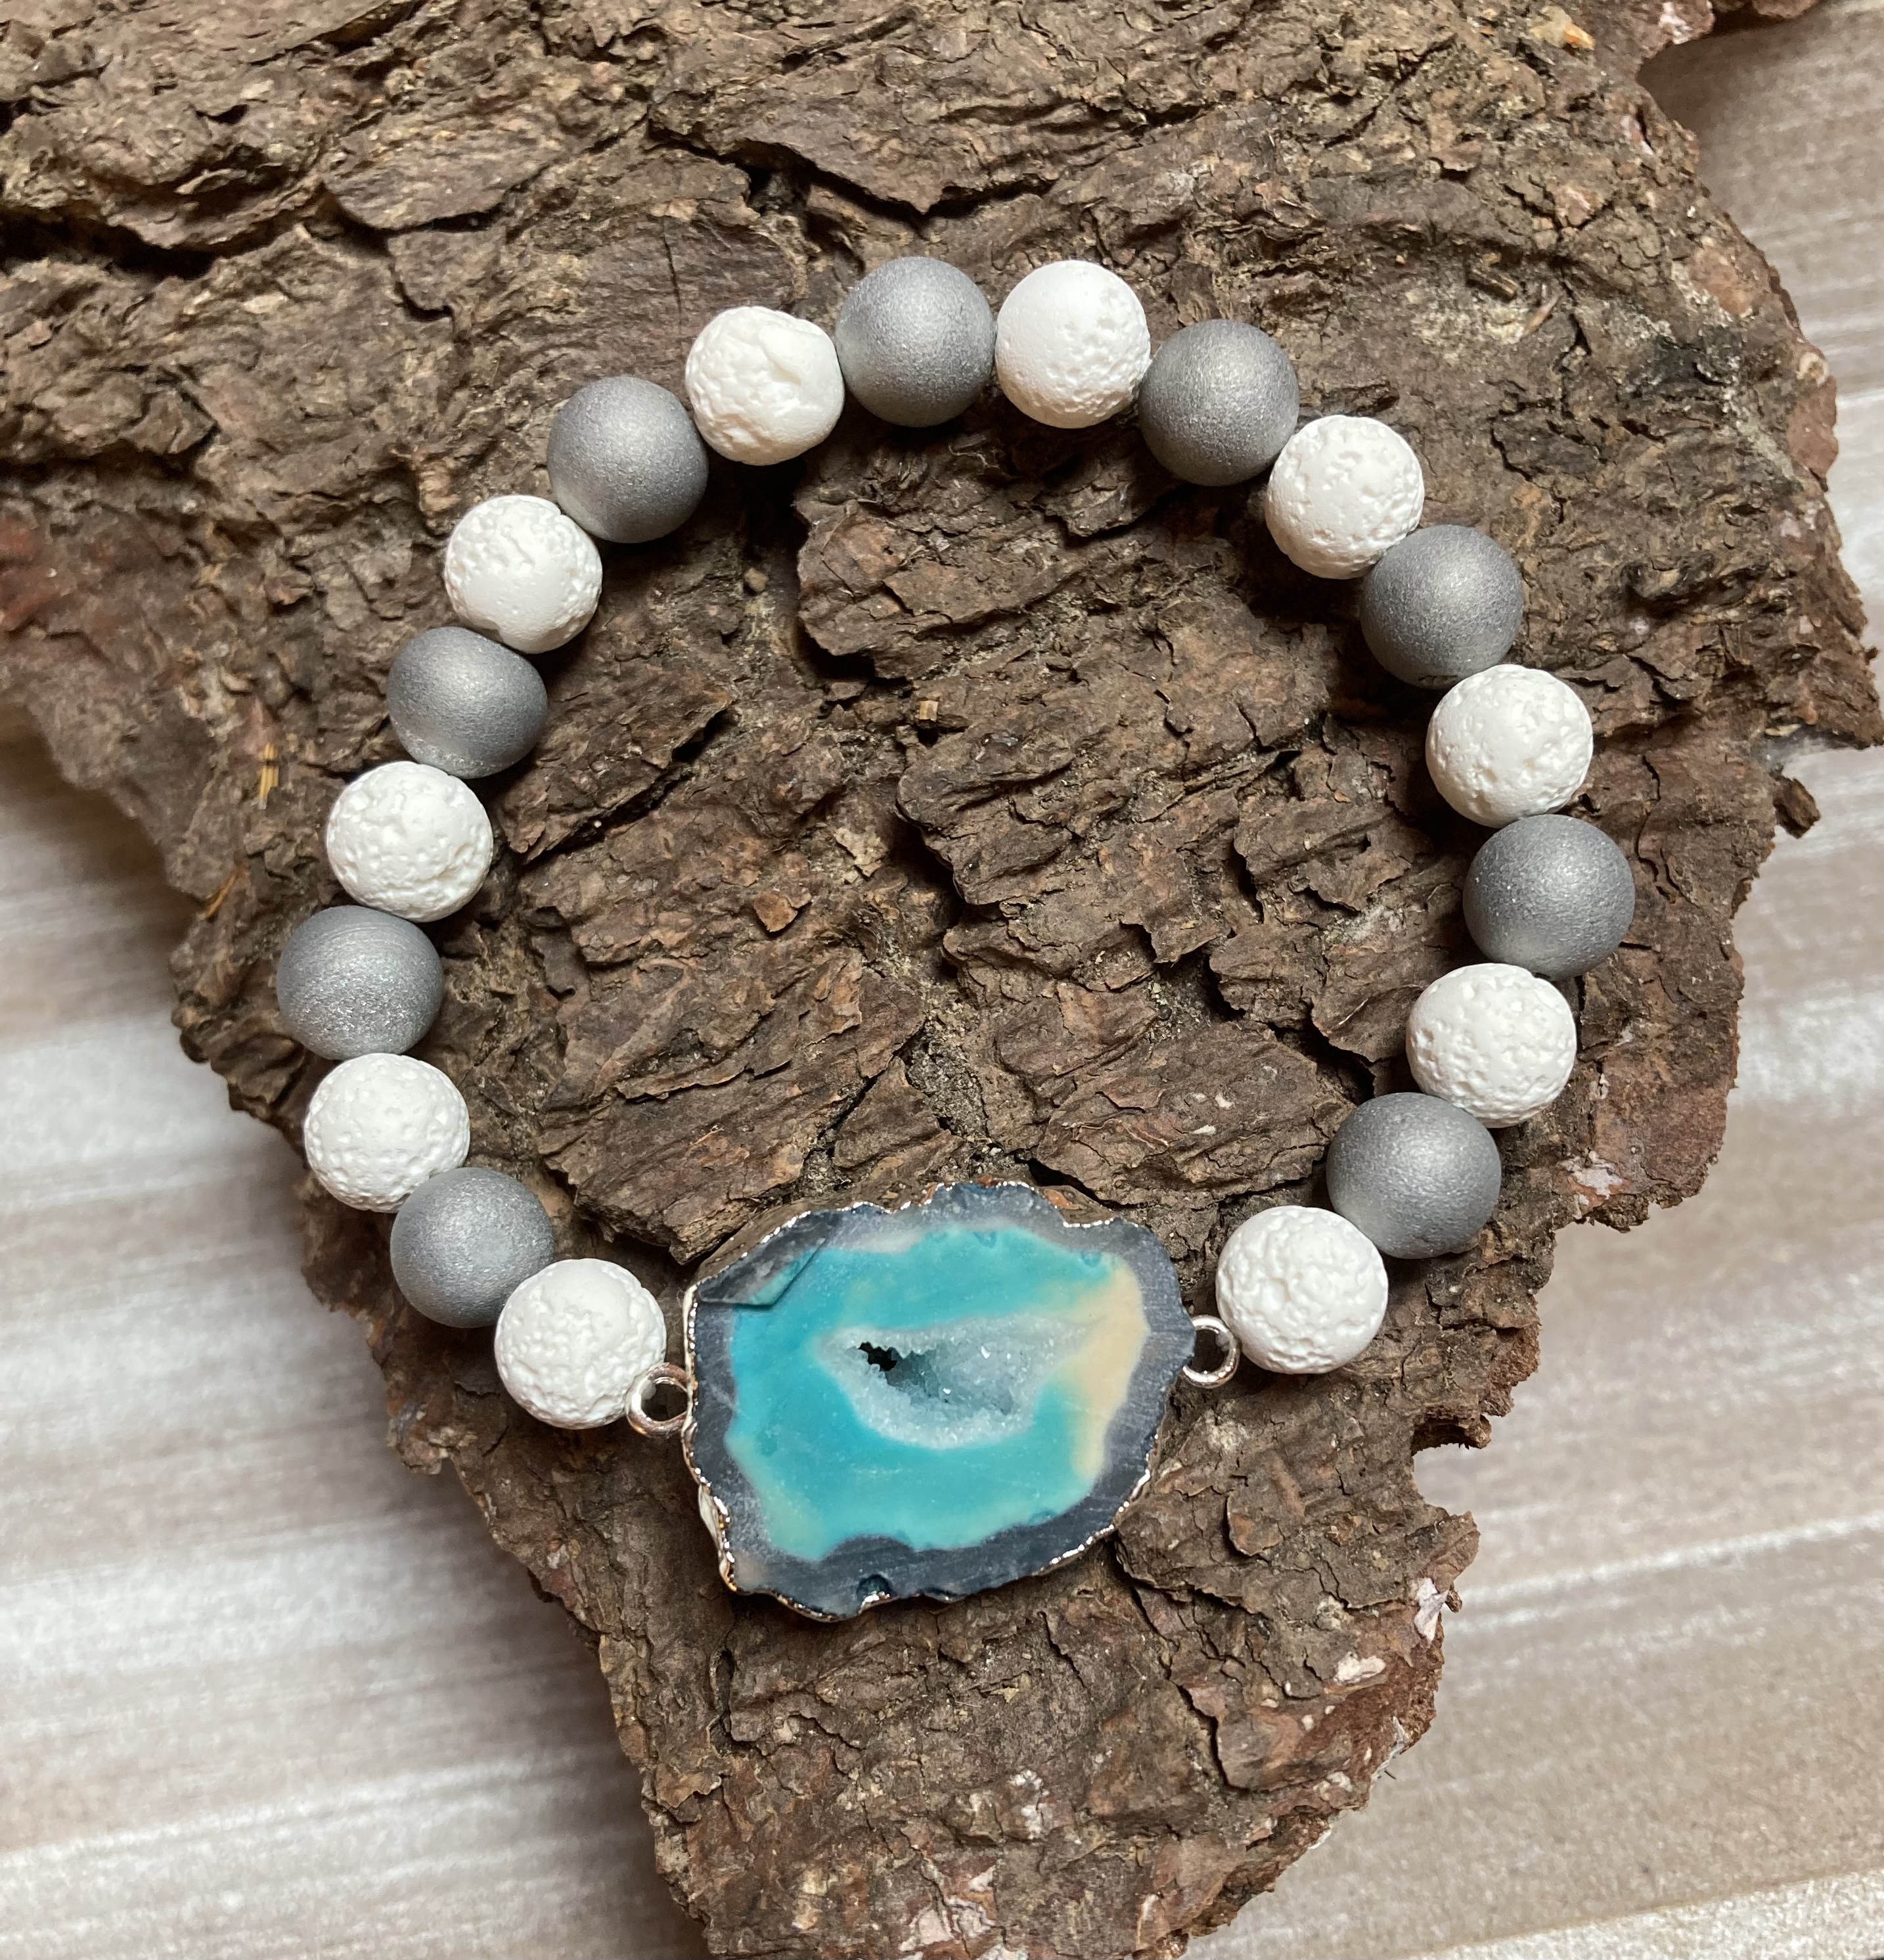 Turquoise Crystal Bracelet | GAIA CENTER Crystal Shop in Cyprus